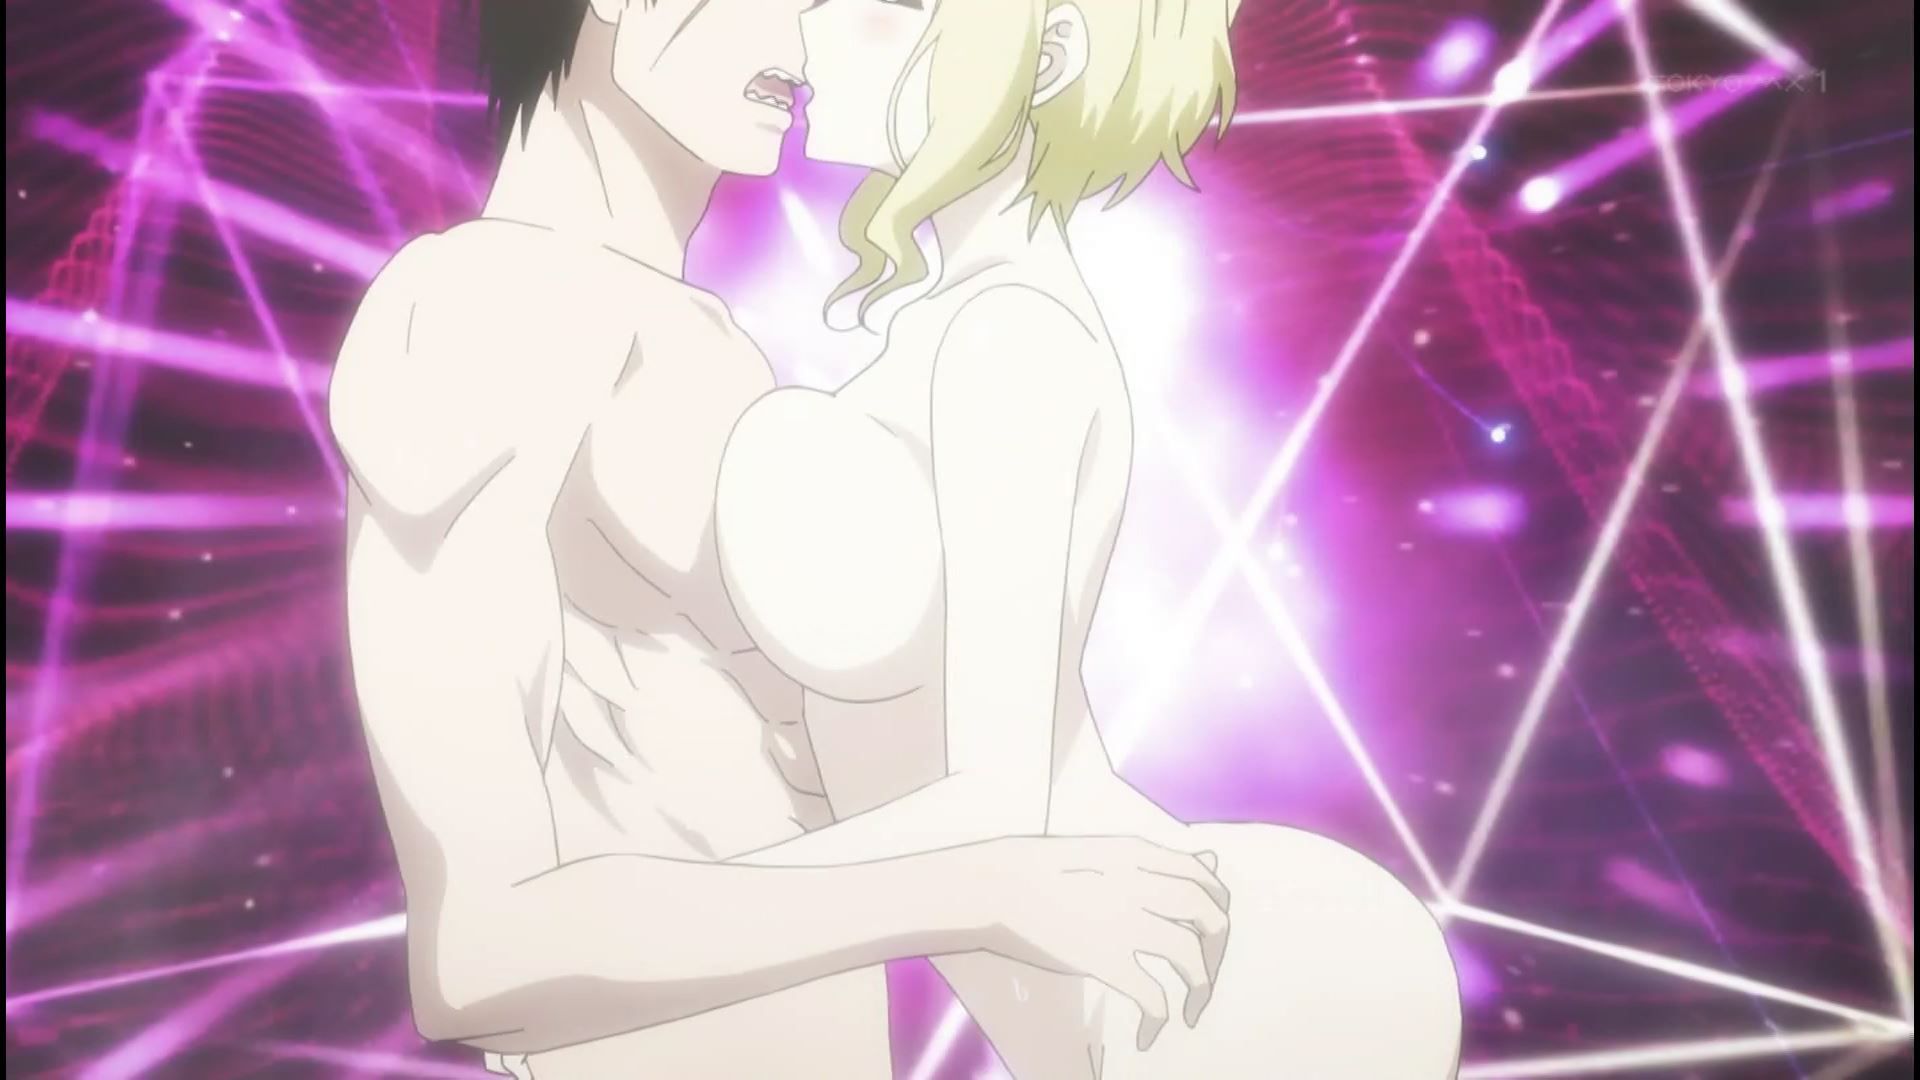 Anime [War x Love (Vallav)] In 11 episodes and become naked with girls and deep kiss or erotic scene! 7